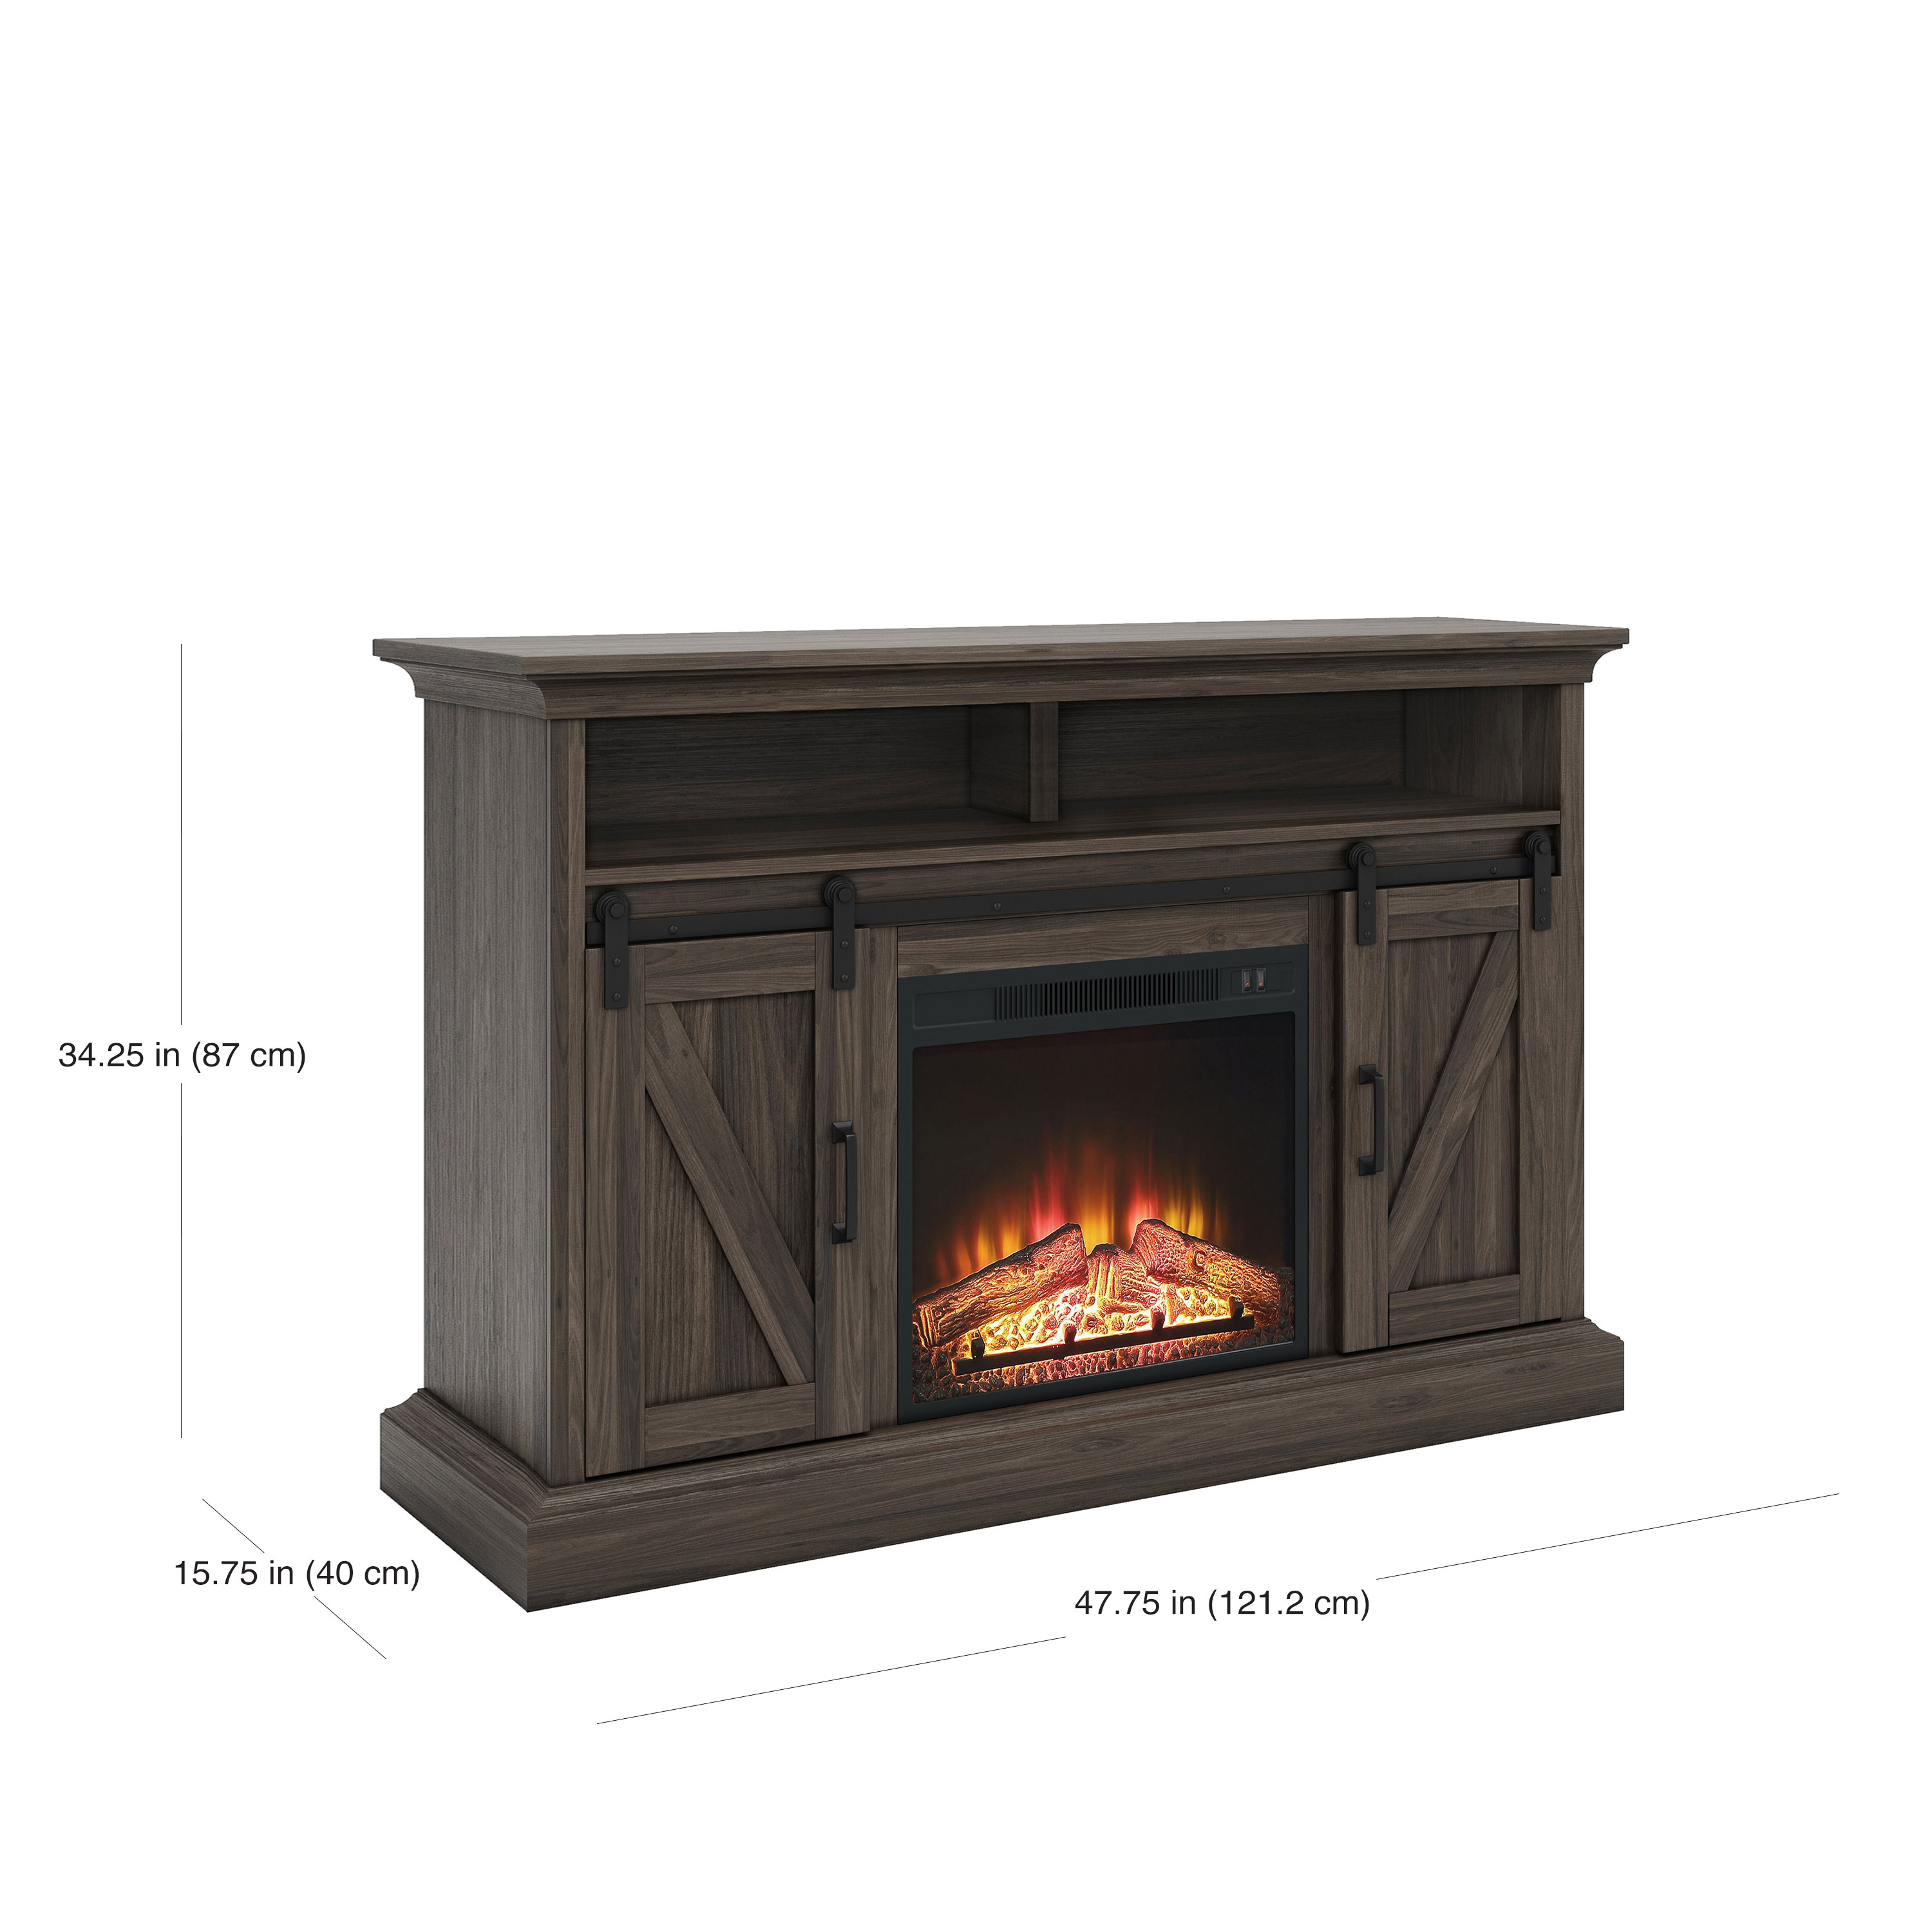 Whalen Allston Barn Door Fireplace TV Stand for TVs Up to 58" - image 2 of 8